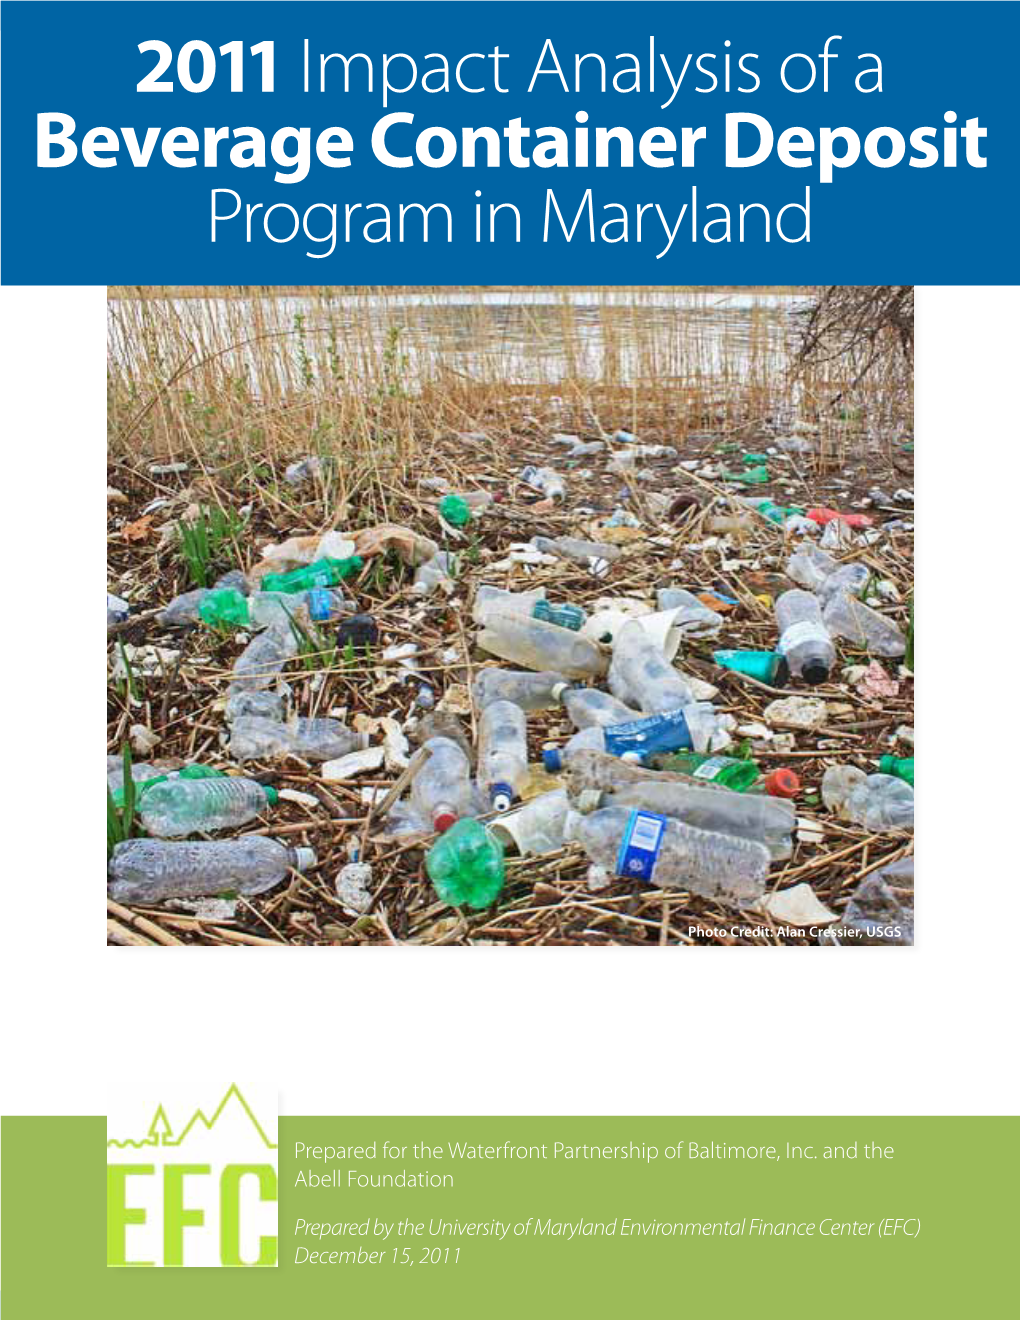 Impact Analysis of a Beverage Container Deposit Program in Maryland